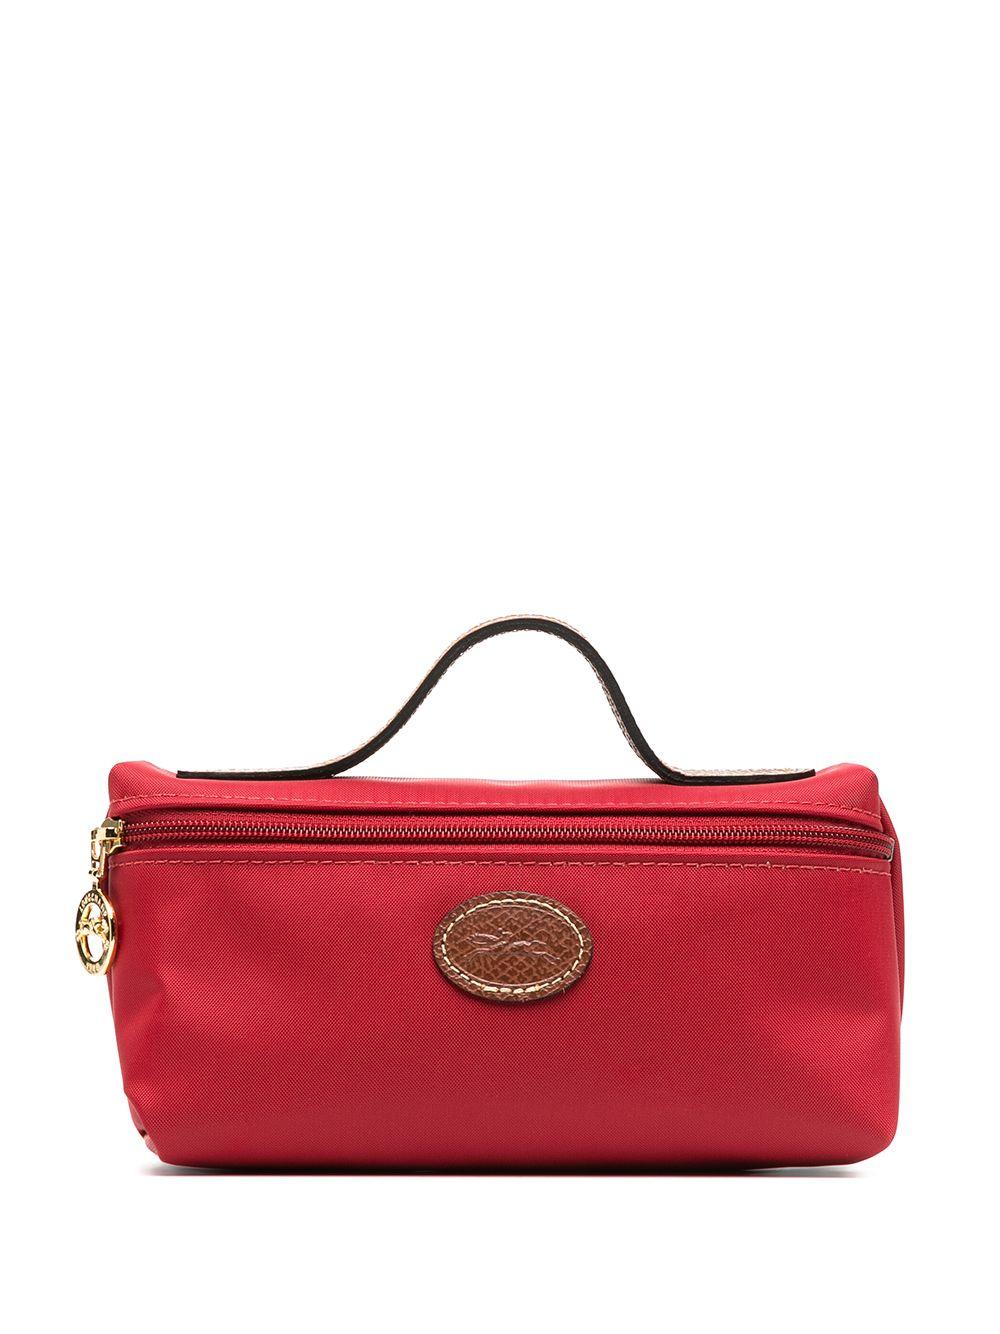 Longchamp Le Pliage Cosmetic Case in Red | Lyst